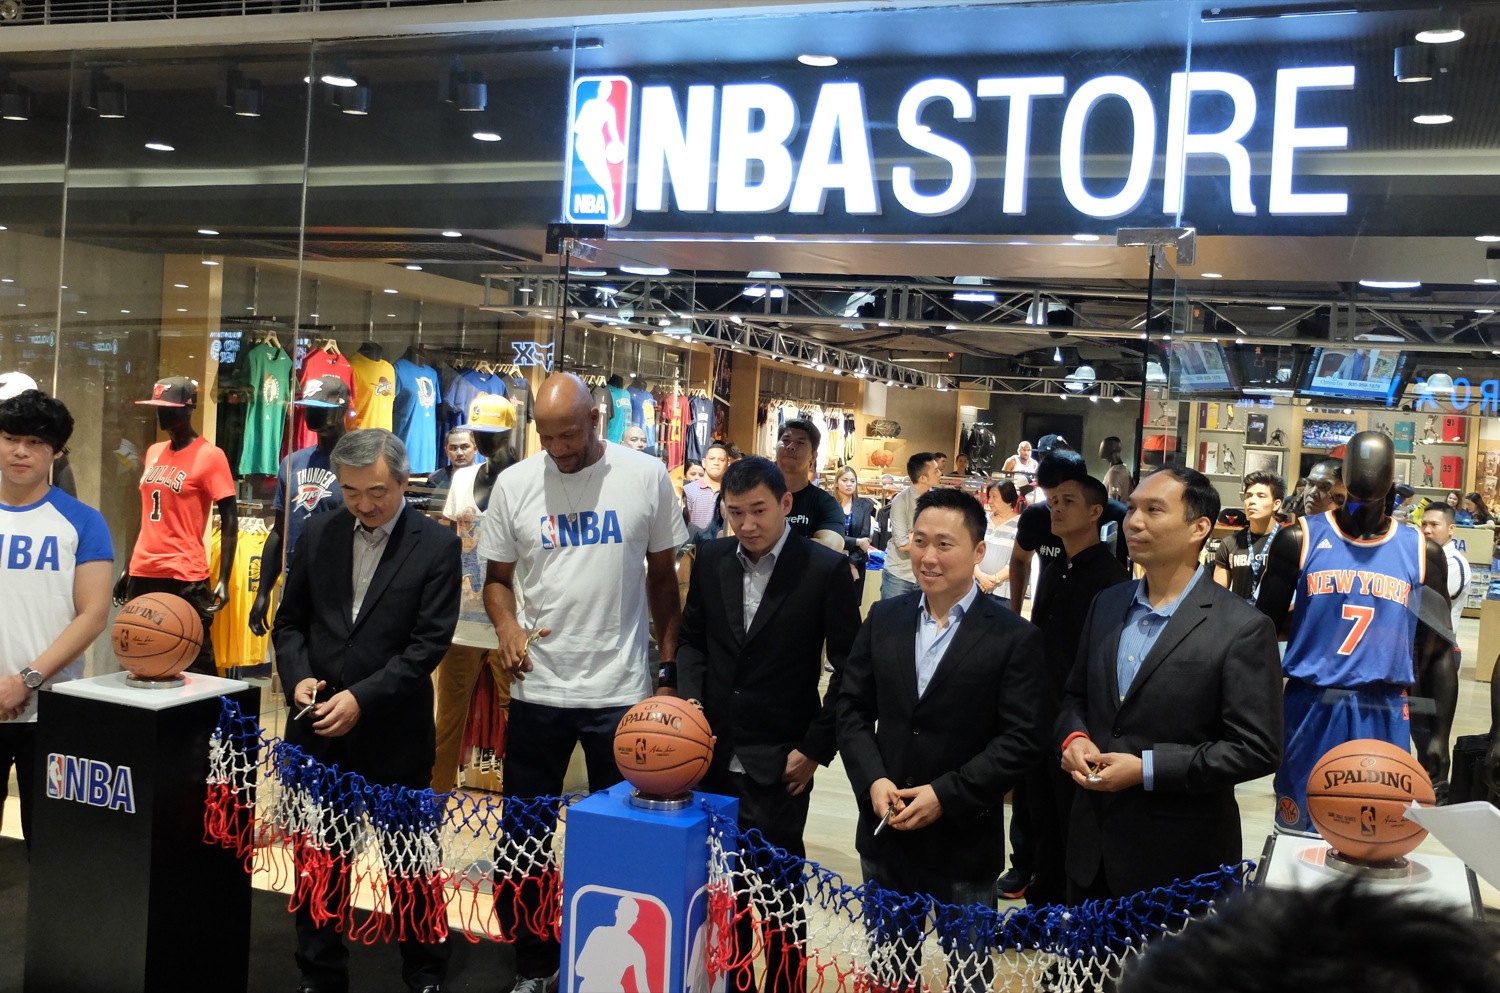 NBA Store Philippines - 12.12 Deal: Up to 50% Off on Selected